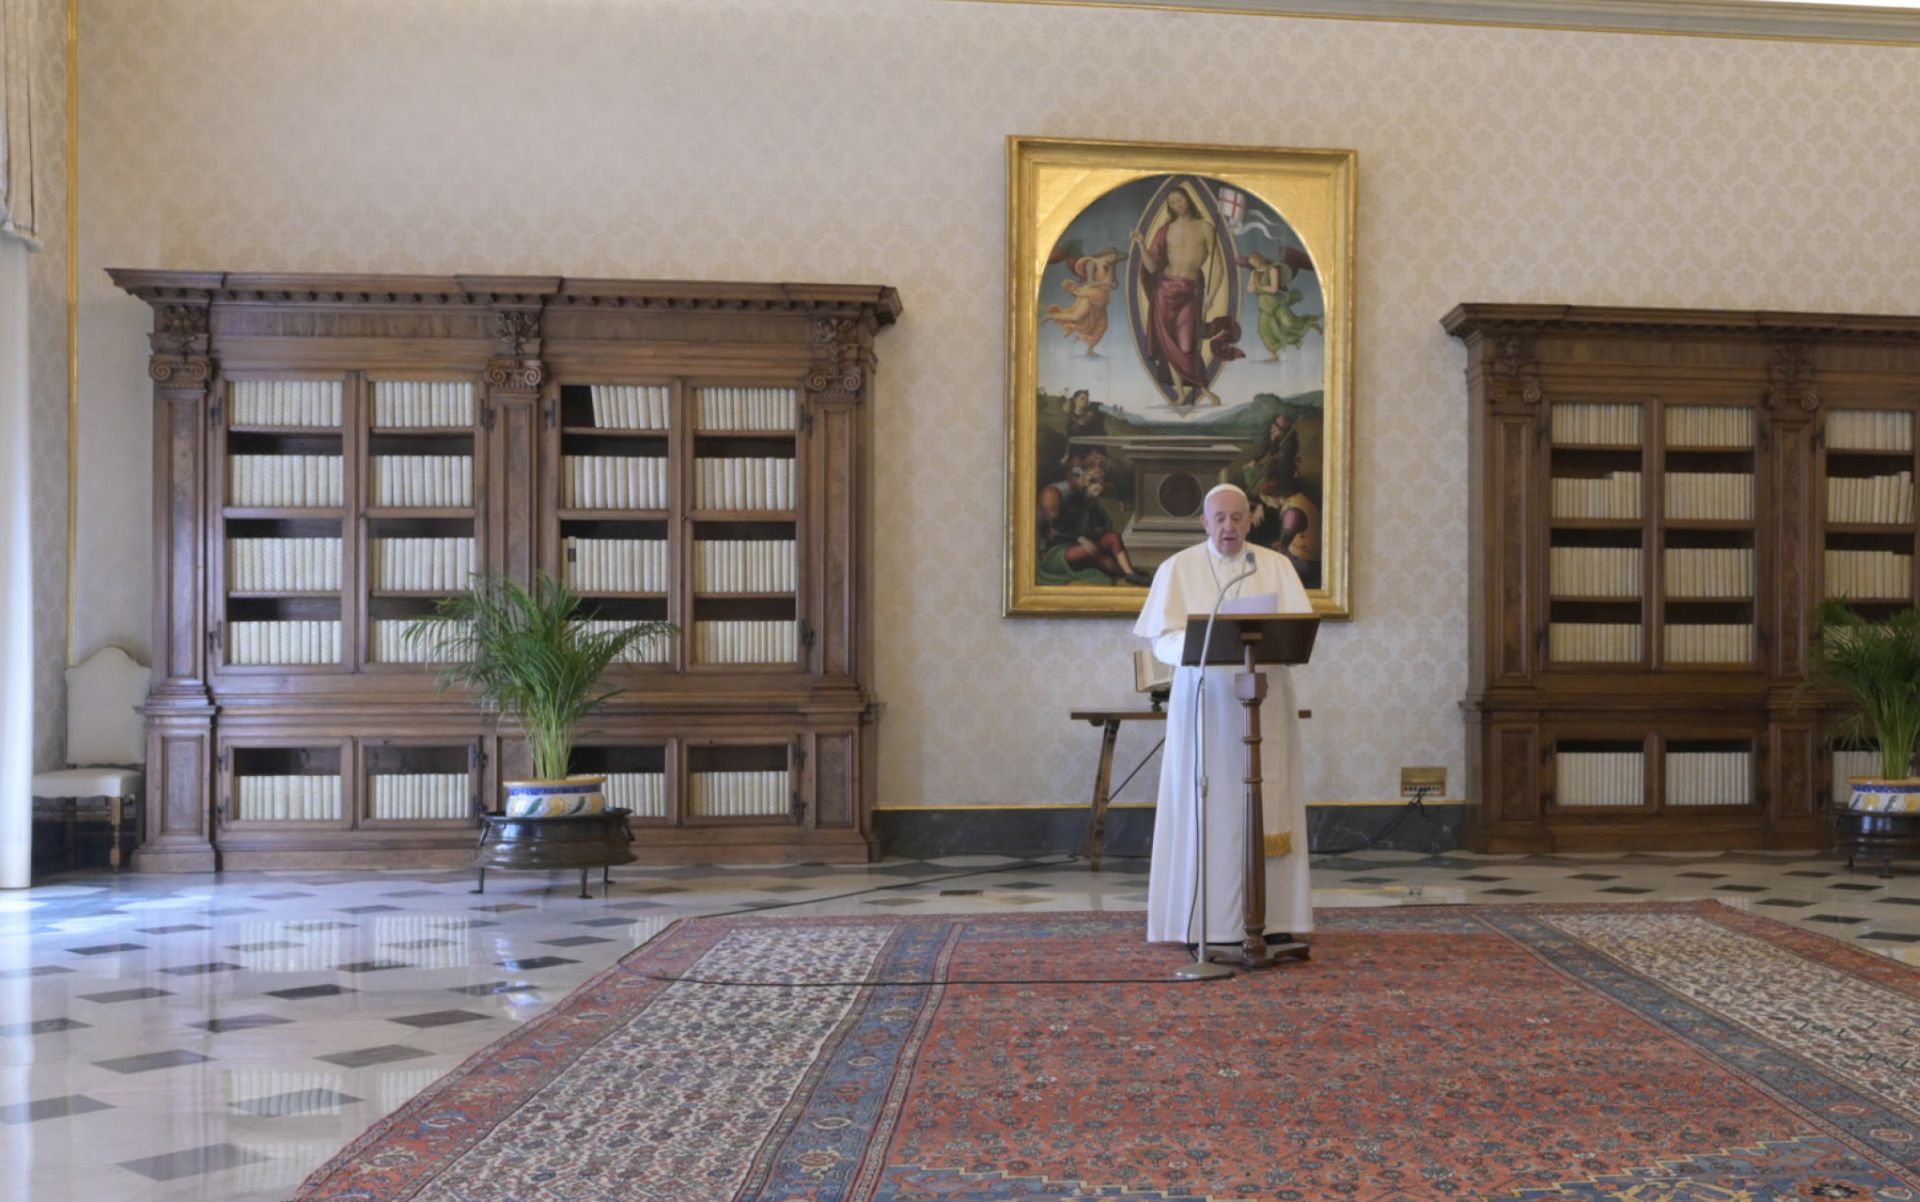 epa08384962 A handout picture provided by the Vatican Media shows Pope Francis during the Recitation of the Regina Coeli prayer at the Library of the Apostolic Palace, Vatican, 26 April 2020. At the Regina Coeli, Pope Francis reflects on the story of the disciples who meet Jesus on the road to Emmaus.  EPA/VATICAN MEDIA HANDOUT  HANDOUT EDITORIAL USE ONLY/NO SALES